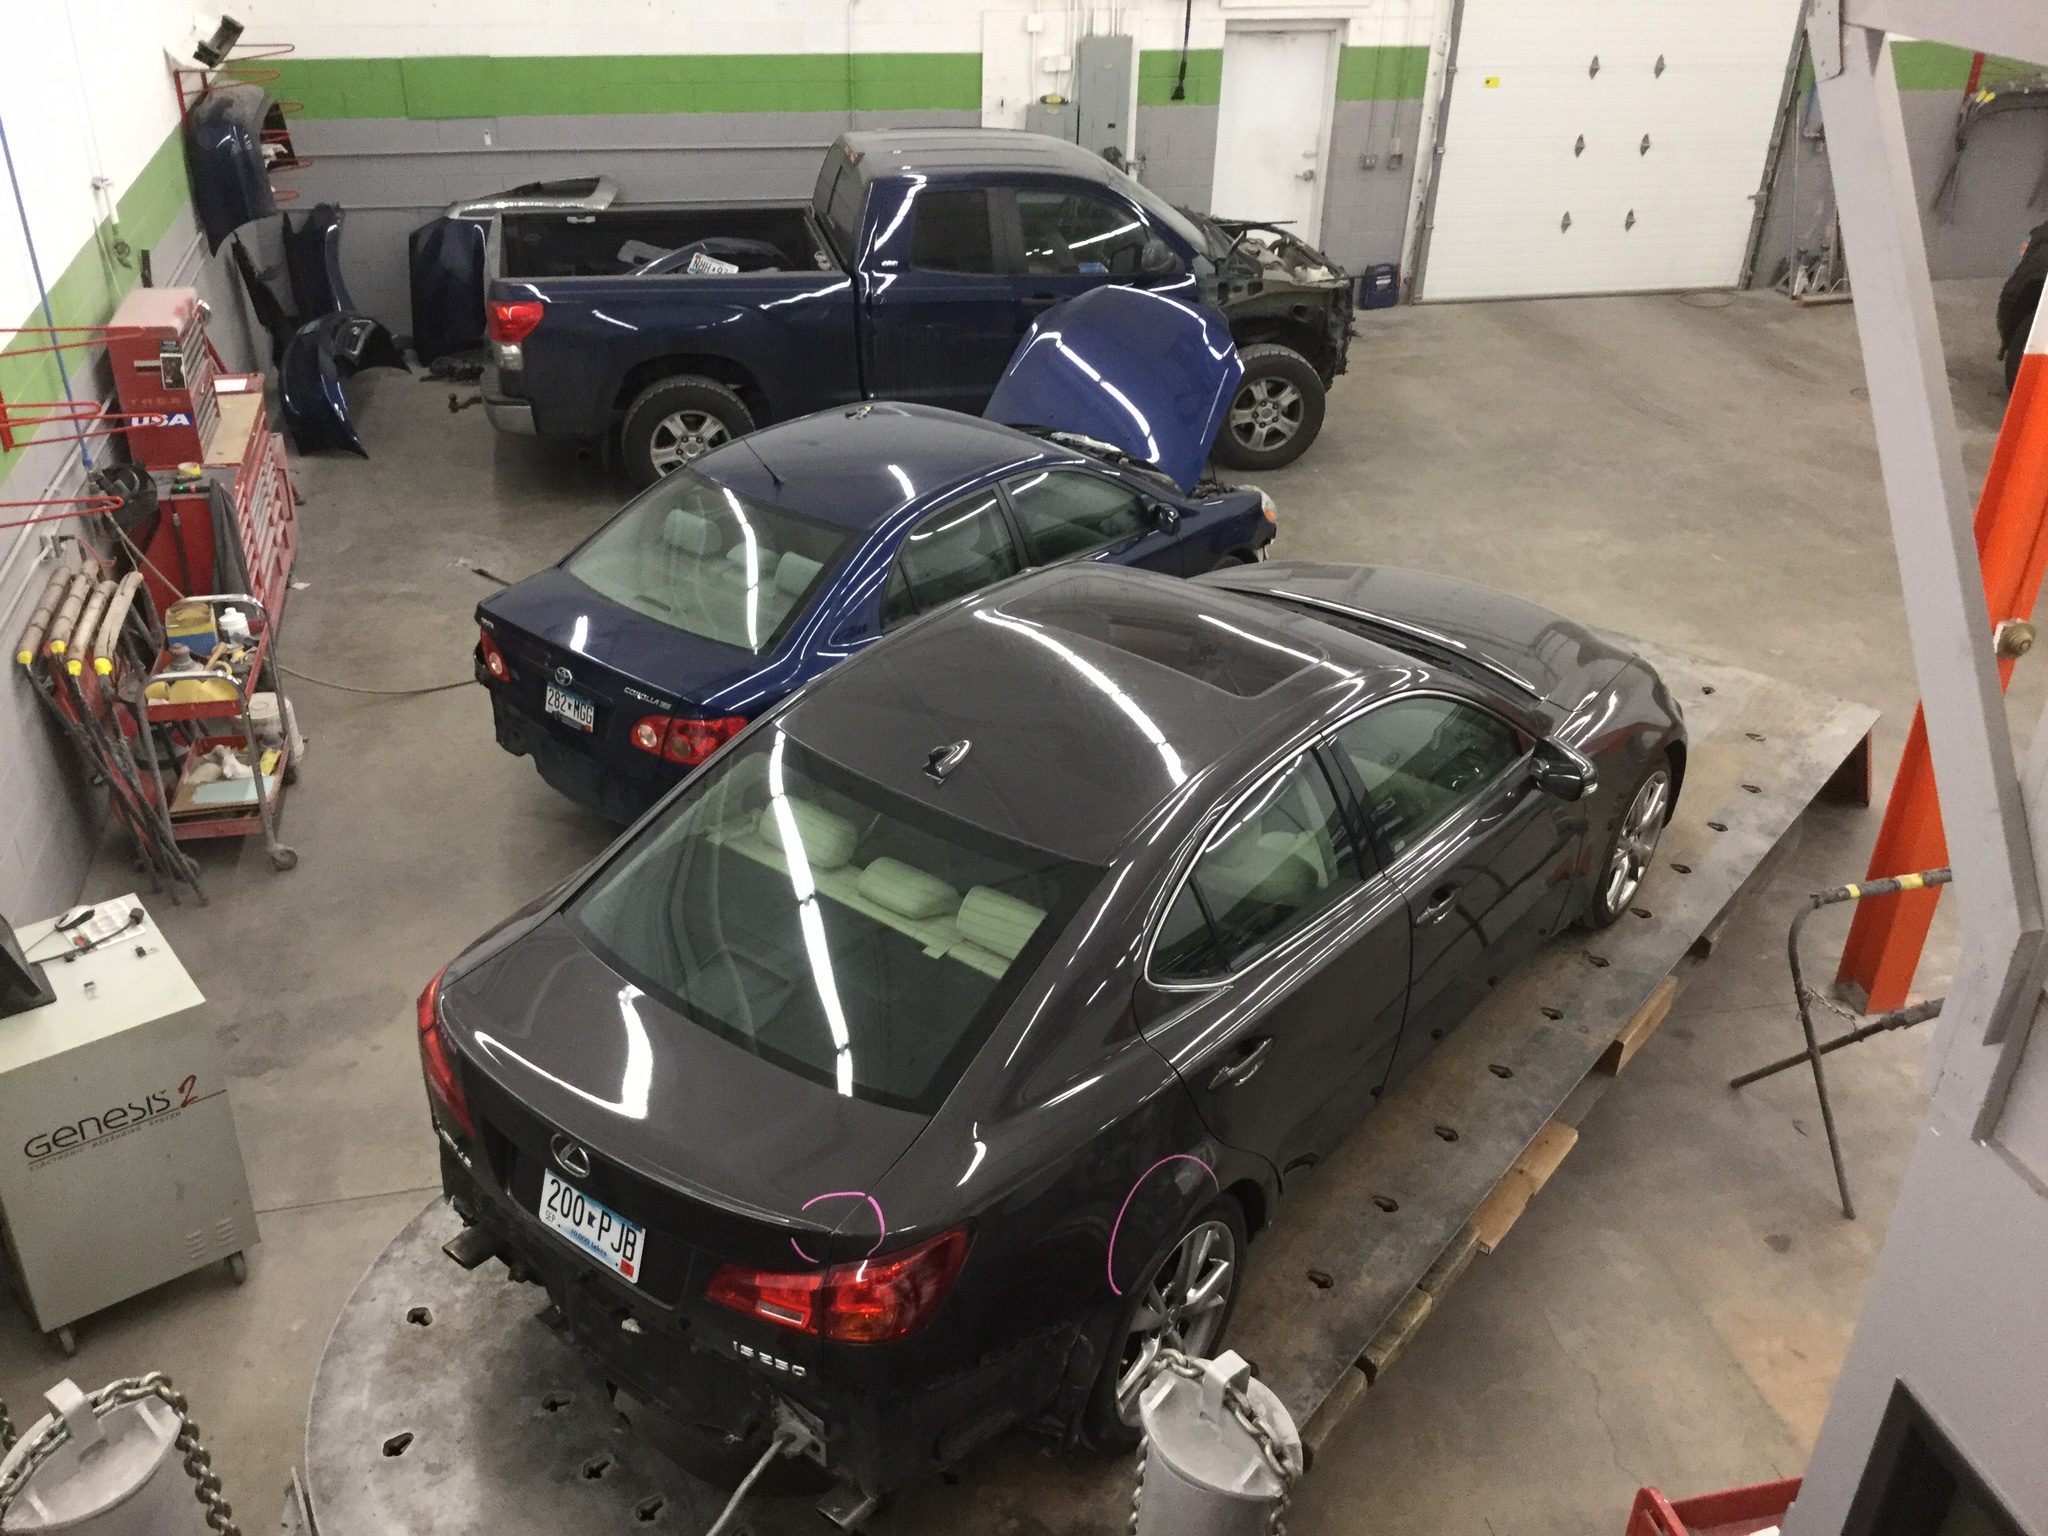 Vehicles in the shop at Advanced Collision Repair are repaired carefully